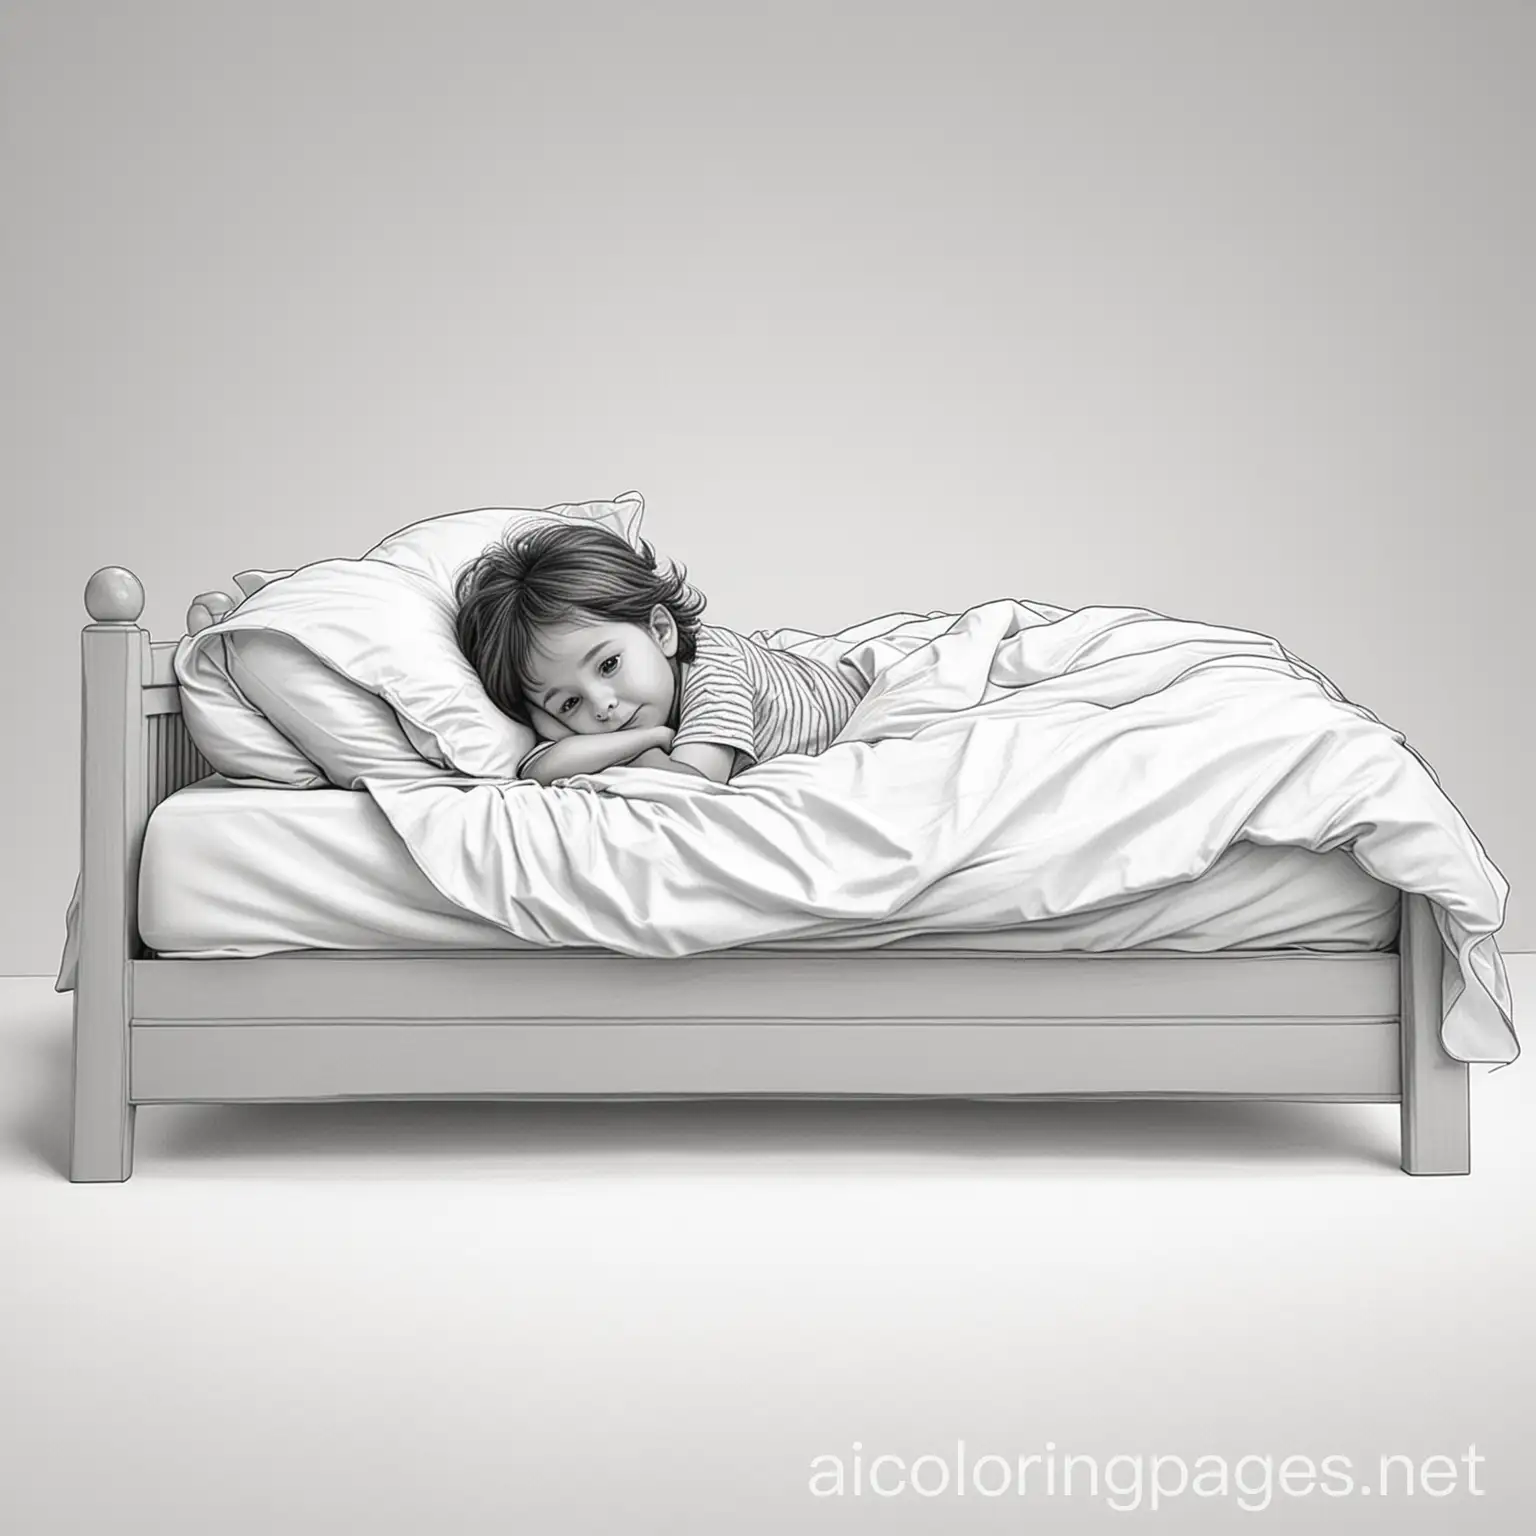 a child under the covers on a cartoon bed






, Coloring Page, black and white, line art, white background, Simplicity, Ample White Space. The background of the coloring page is plain white to make it easy for young children to color within the lines. The outlines of all the subjects are easy to distinguish, making it simple for kids to color without too much difficulty